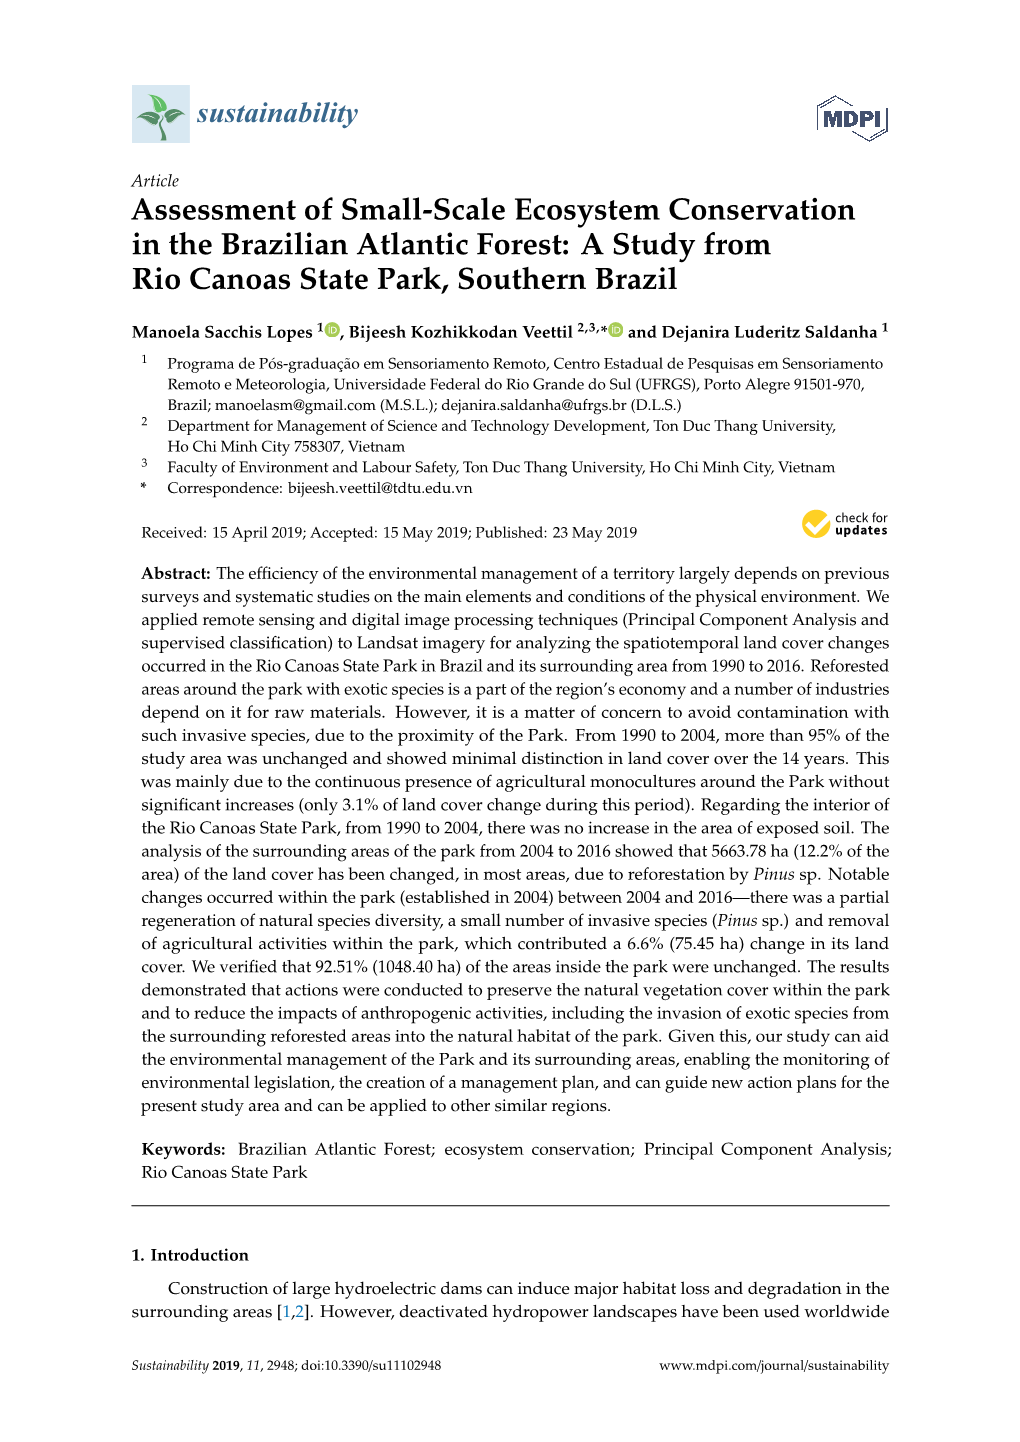 Assessment of Small-Scale Ecosystem Conservation in the Brazilian Atlantic Forest: a Study from Rio Canoas State Park, Southern Brazil